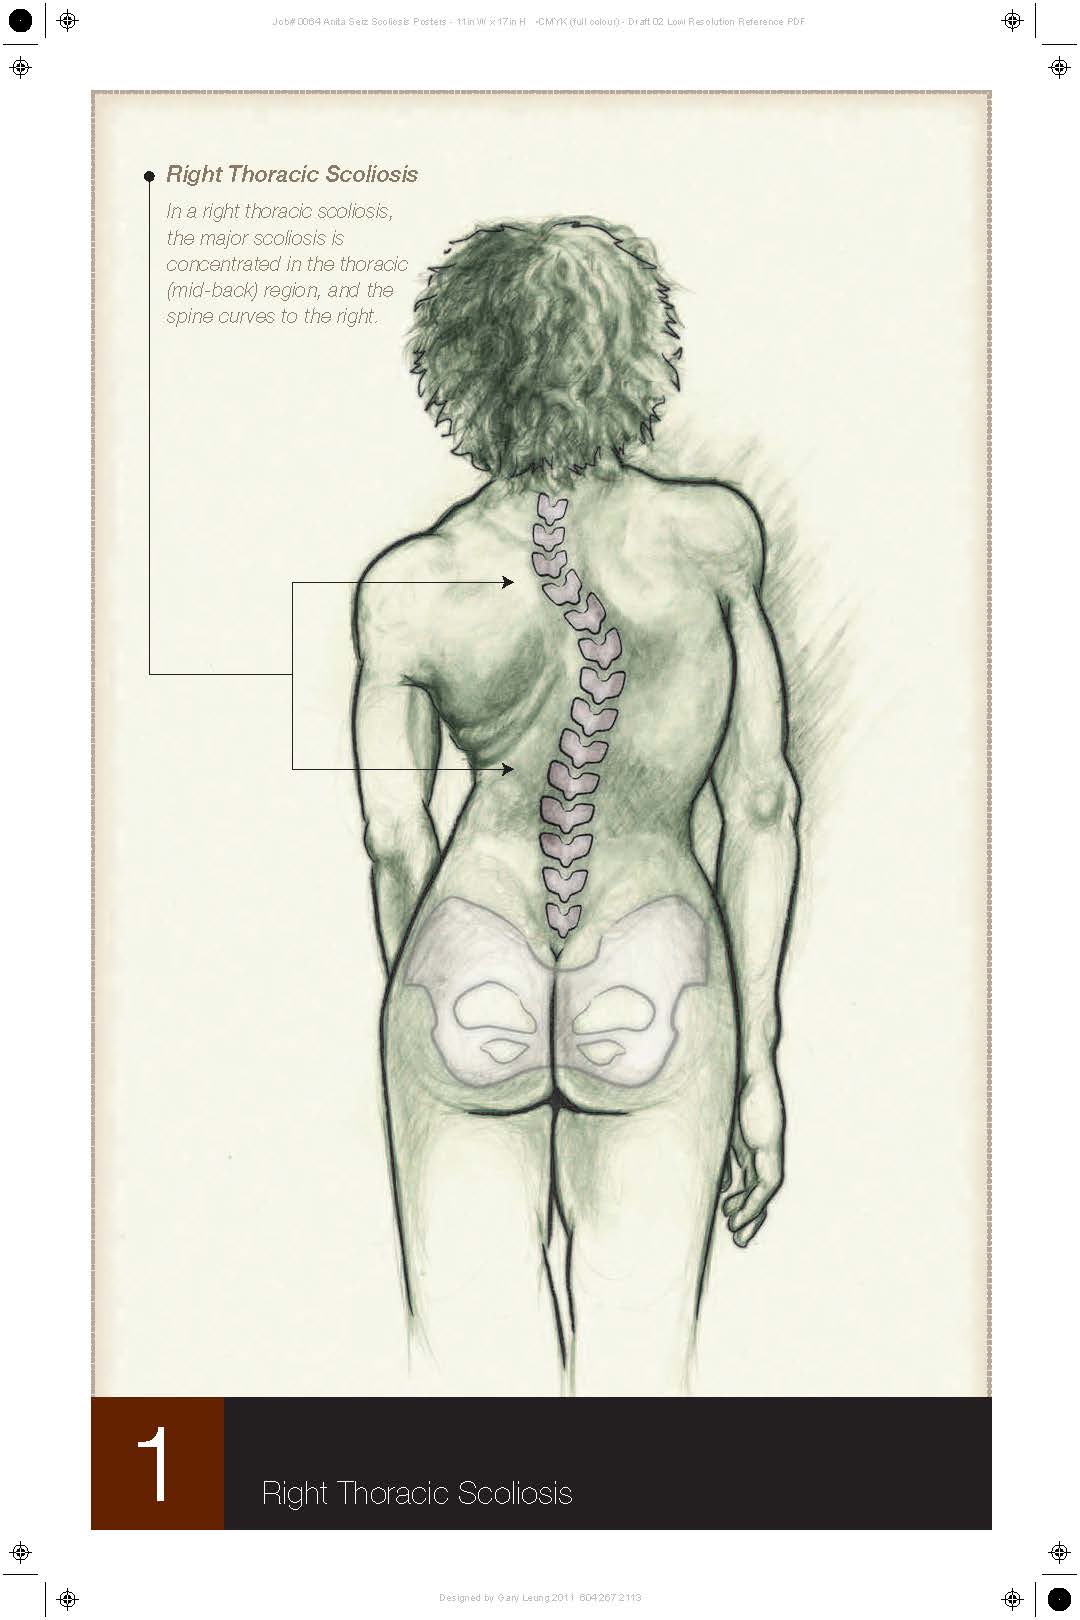 Scoliosis Curve - Thoracic Spine.jpg